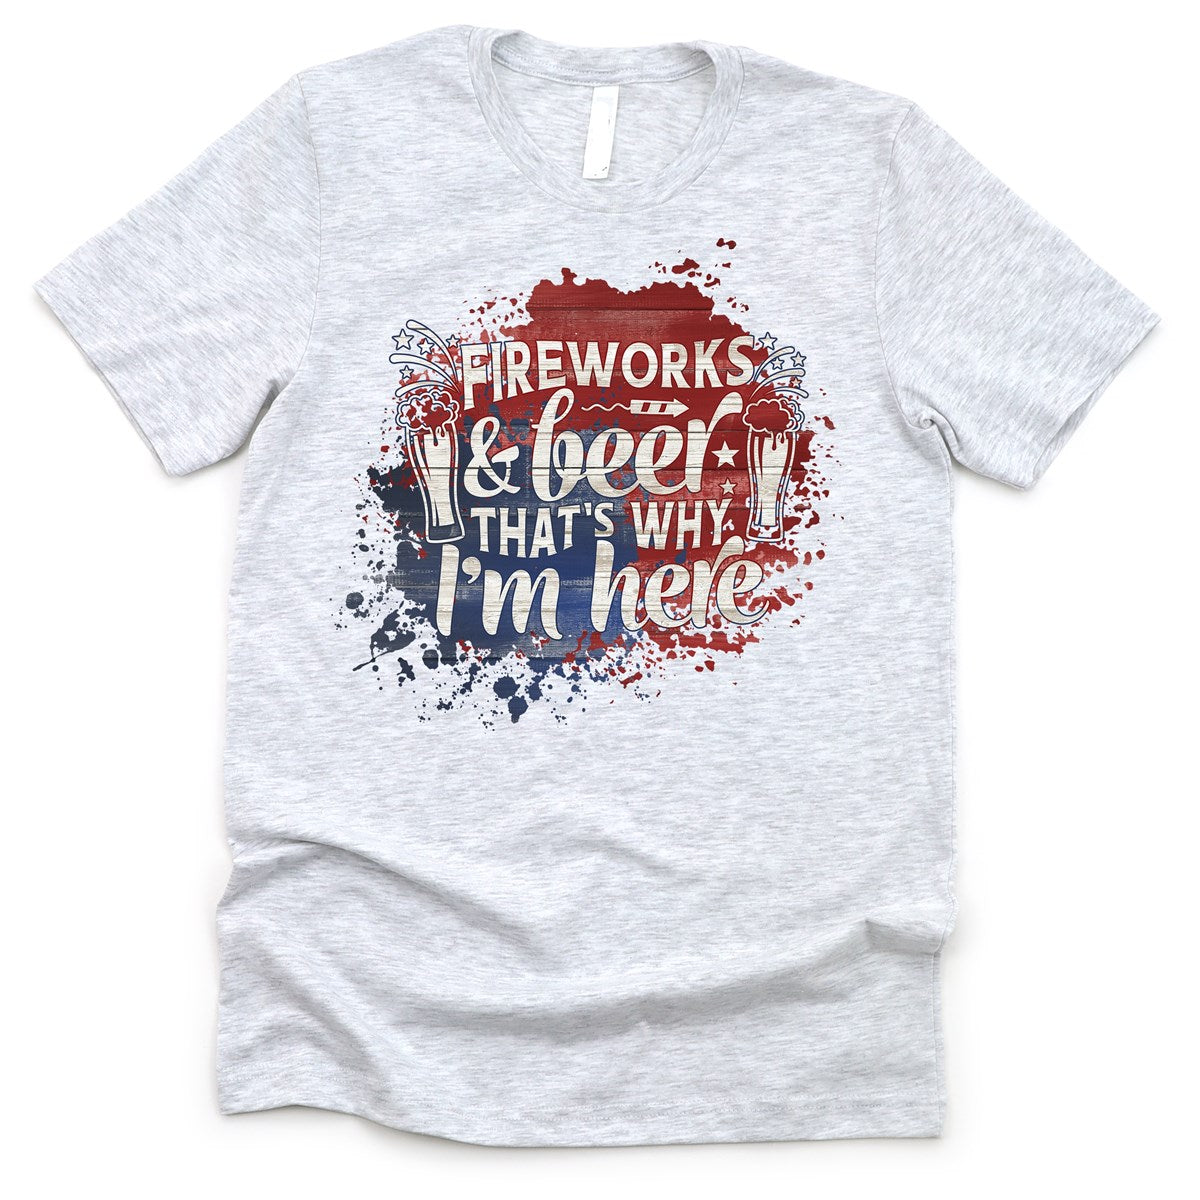 Fireworks & Beer That's Why I'm Here Tee